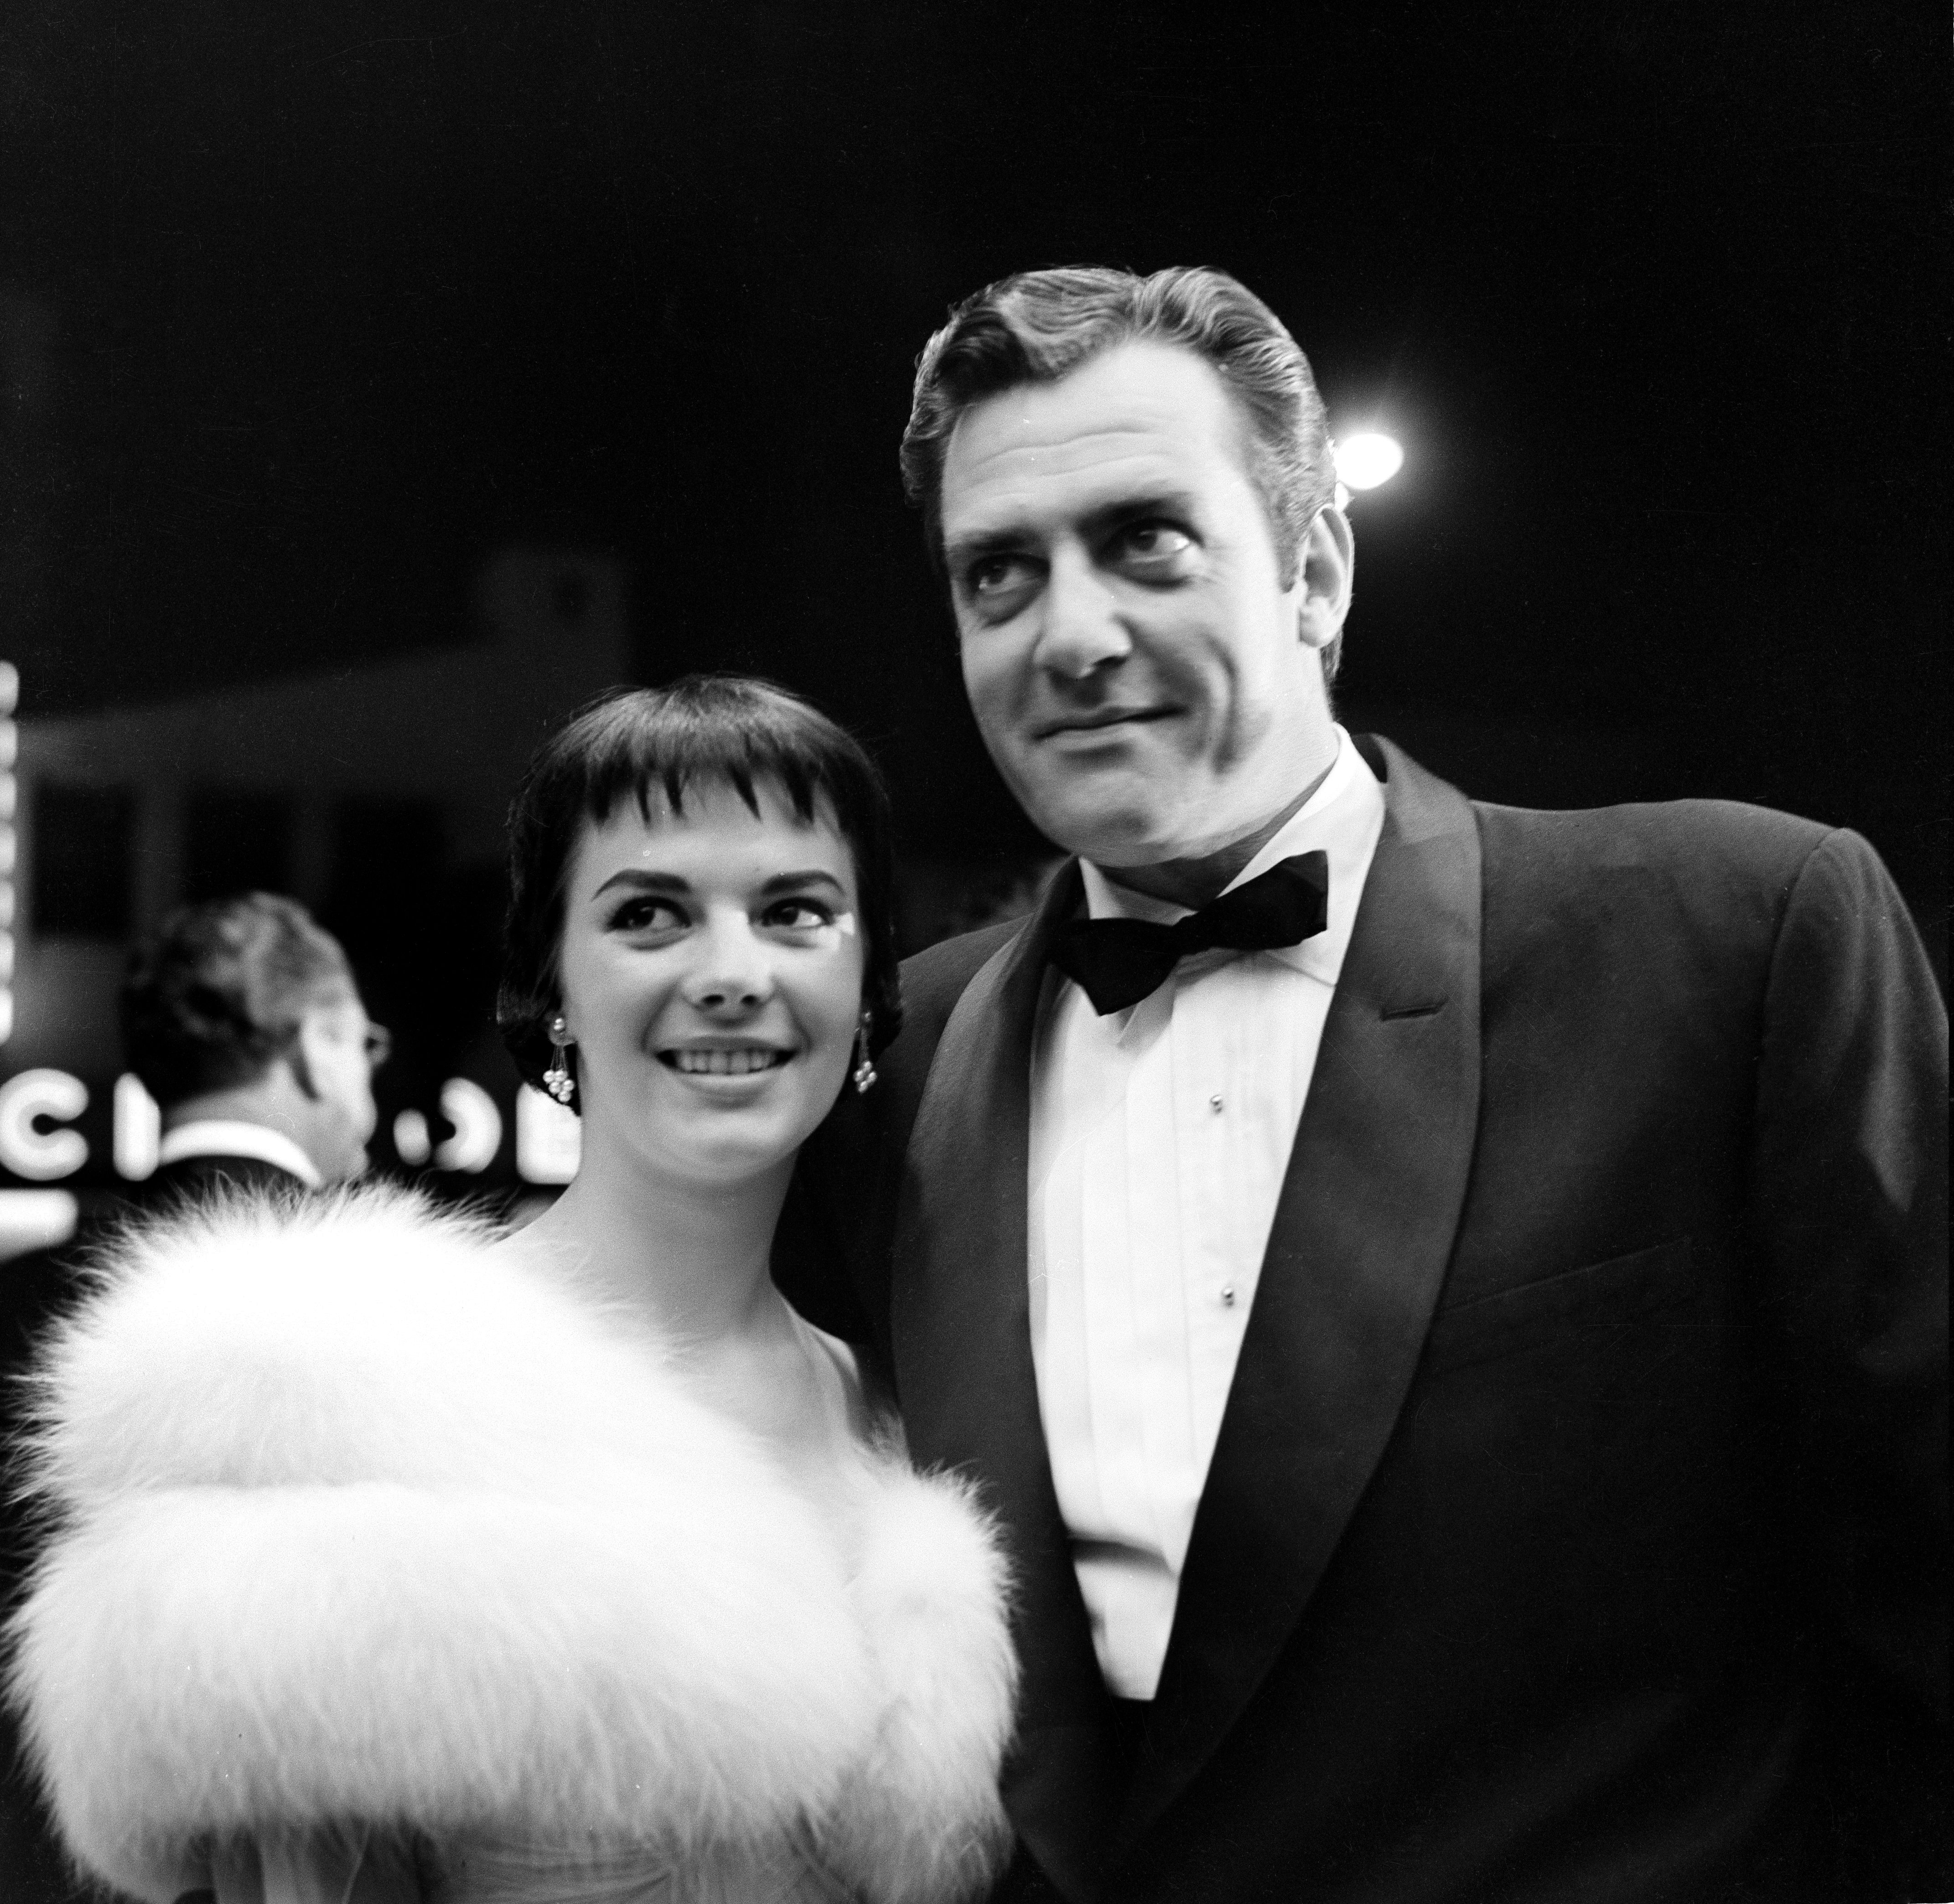 Actress Natalie Wood with Raymond Burr attending the premiere of "A Cry in the Night" in Los Angeles, California. | Source: Getty Images